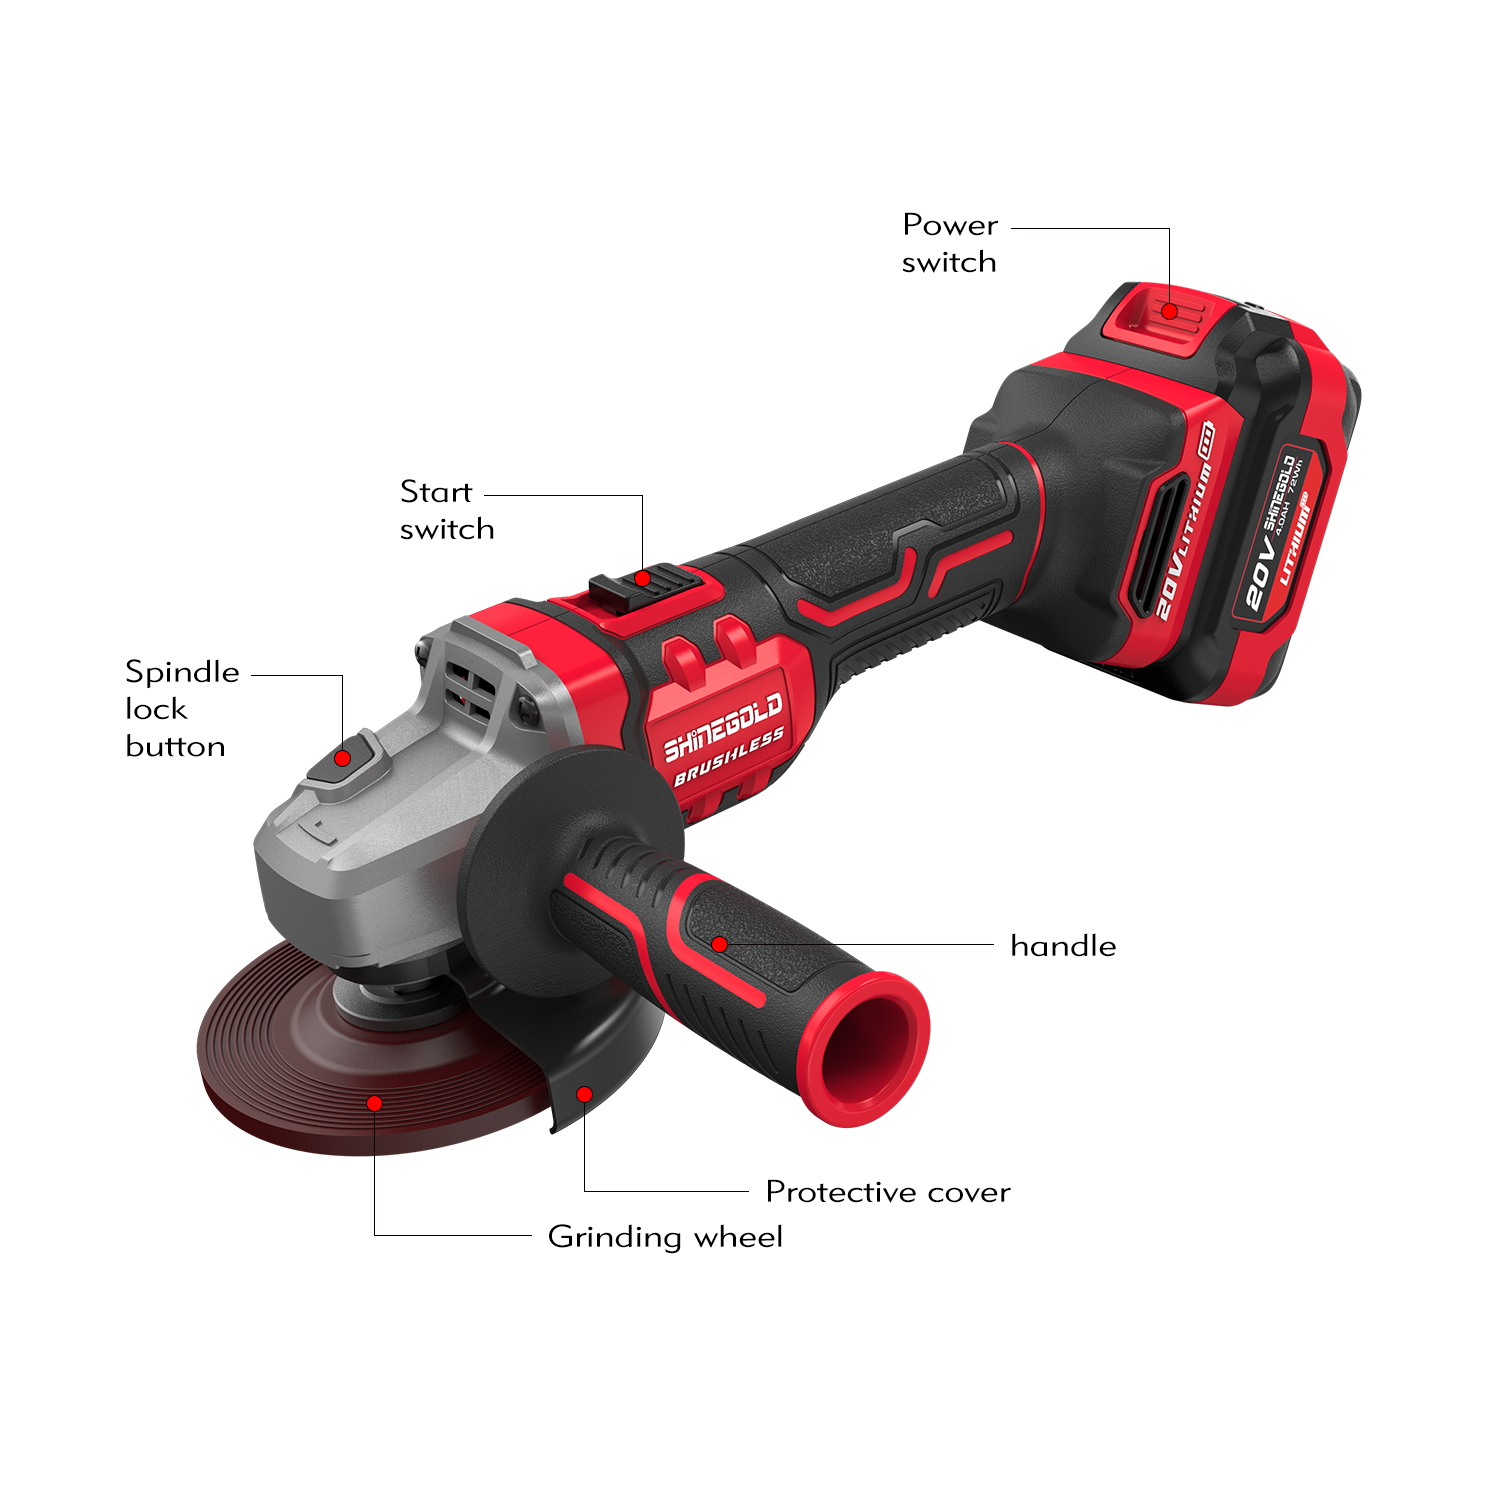 20V Cordless Brushless Lithium Power Tools 8000 RPM /min Long Handle Angle Grinder